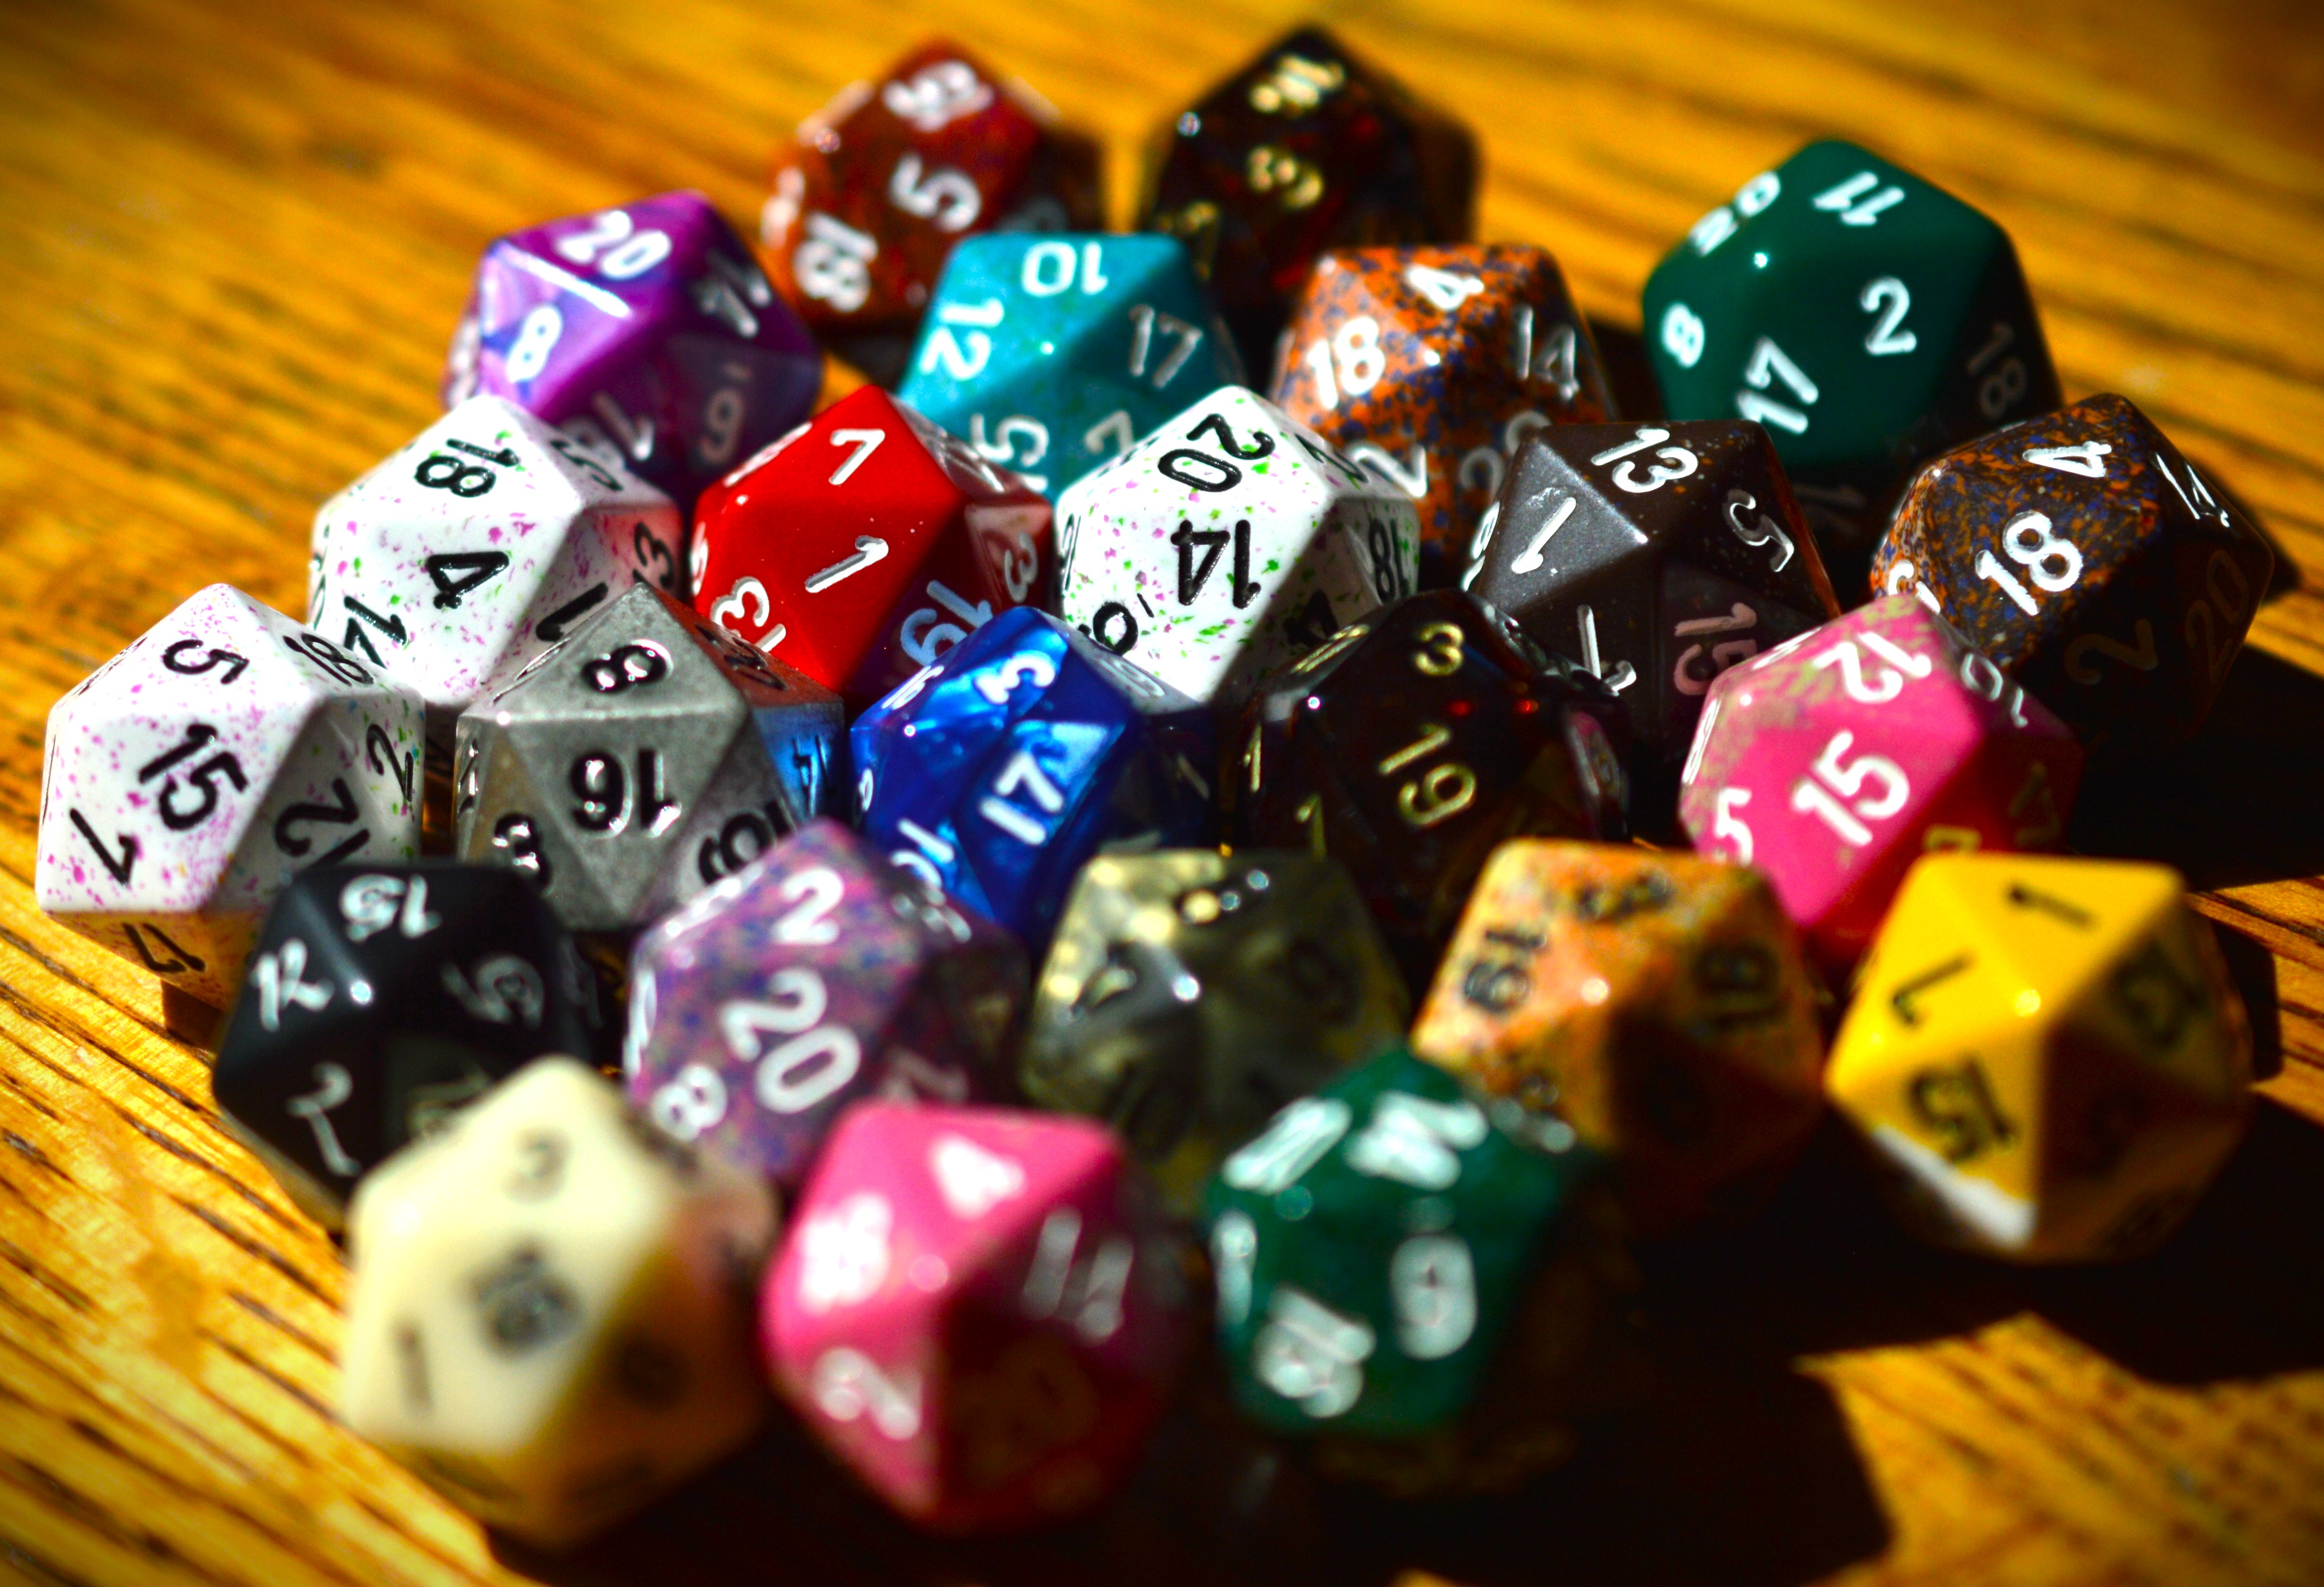 A pile of 20-sided dice in a variety of colors on a wooden table.